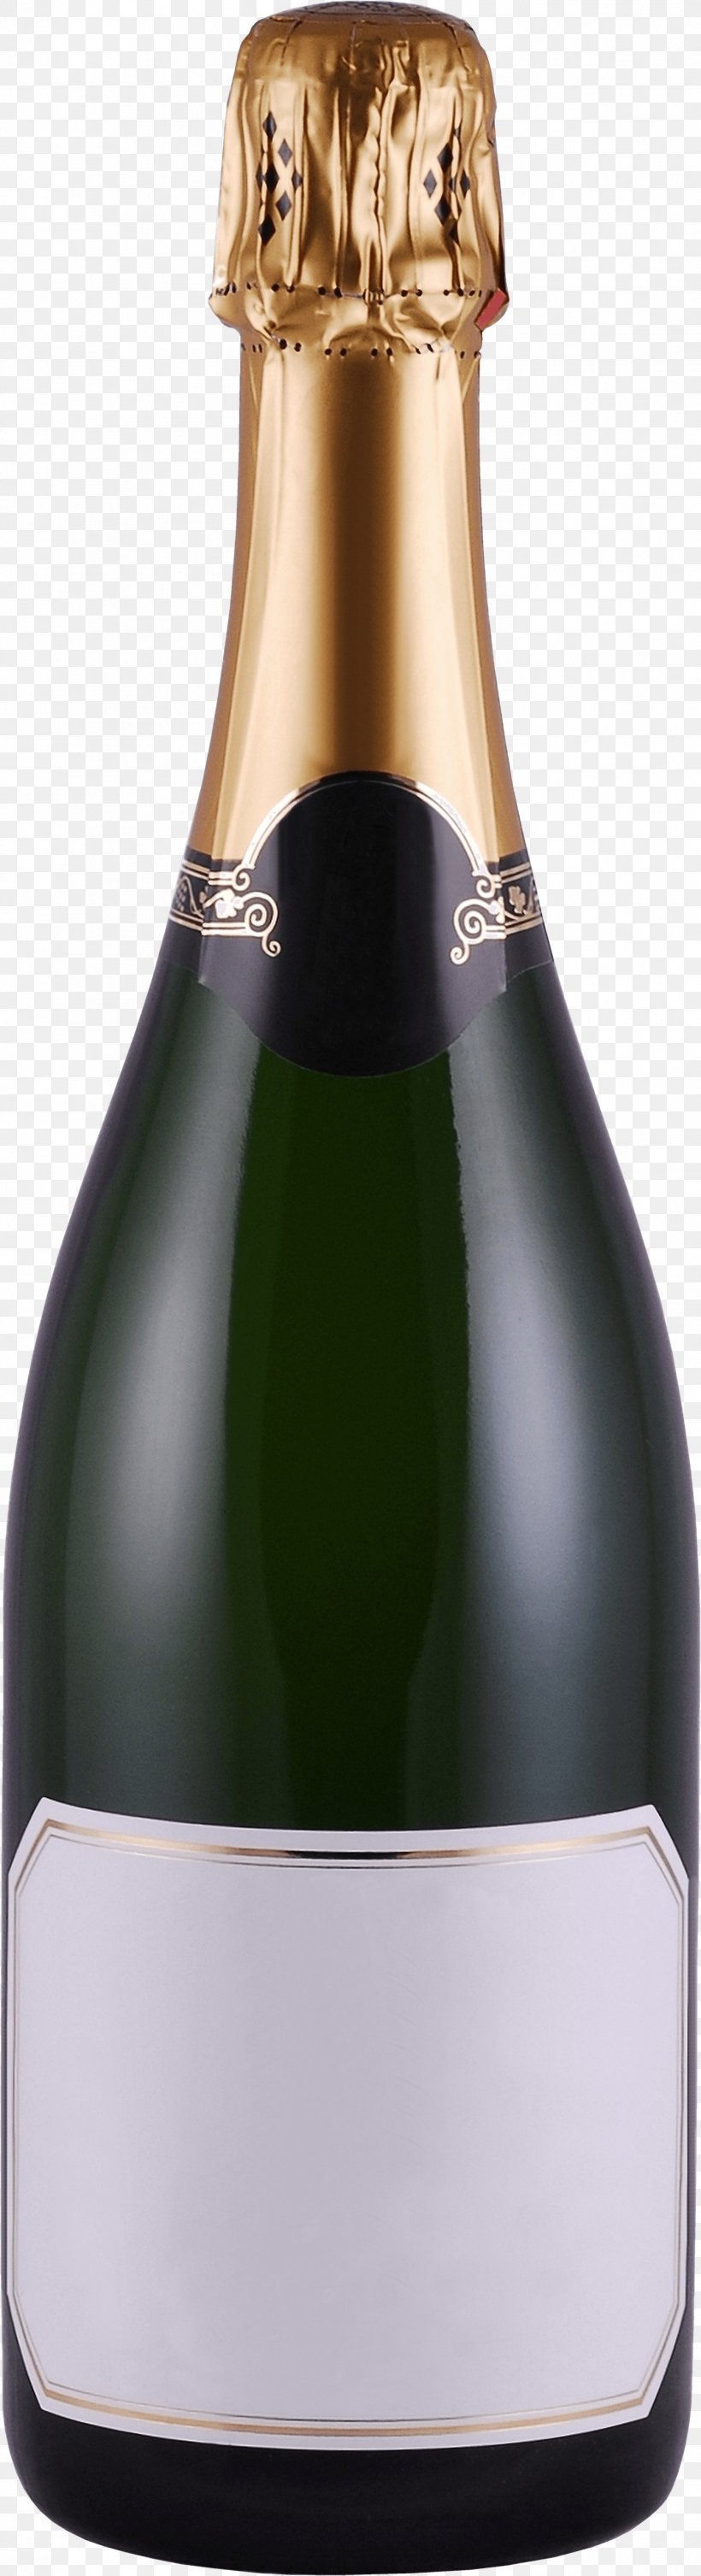 Champagne Bottle, PNG, 1389x5104px, Champagne, Alcoholic Beverage, Bottle, Clipping Path, Drink Download Free